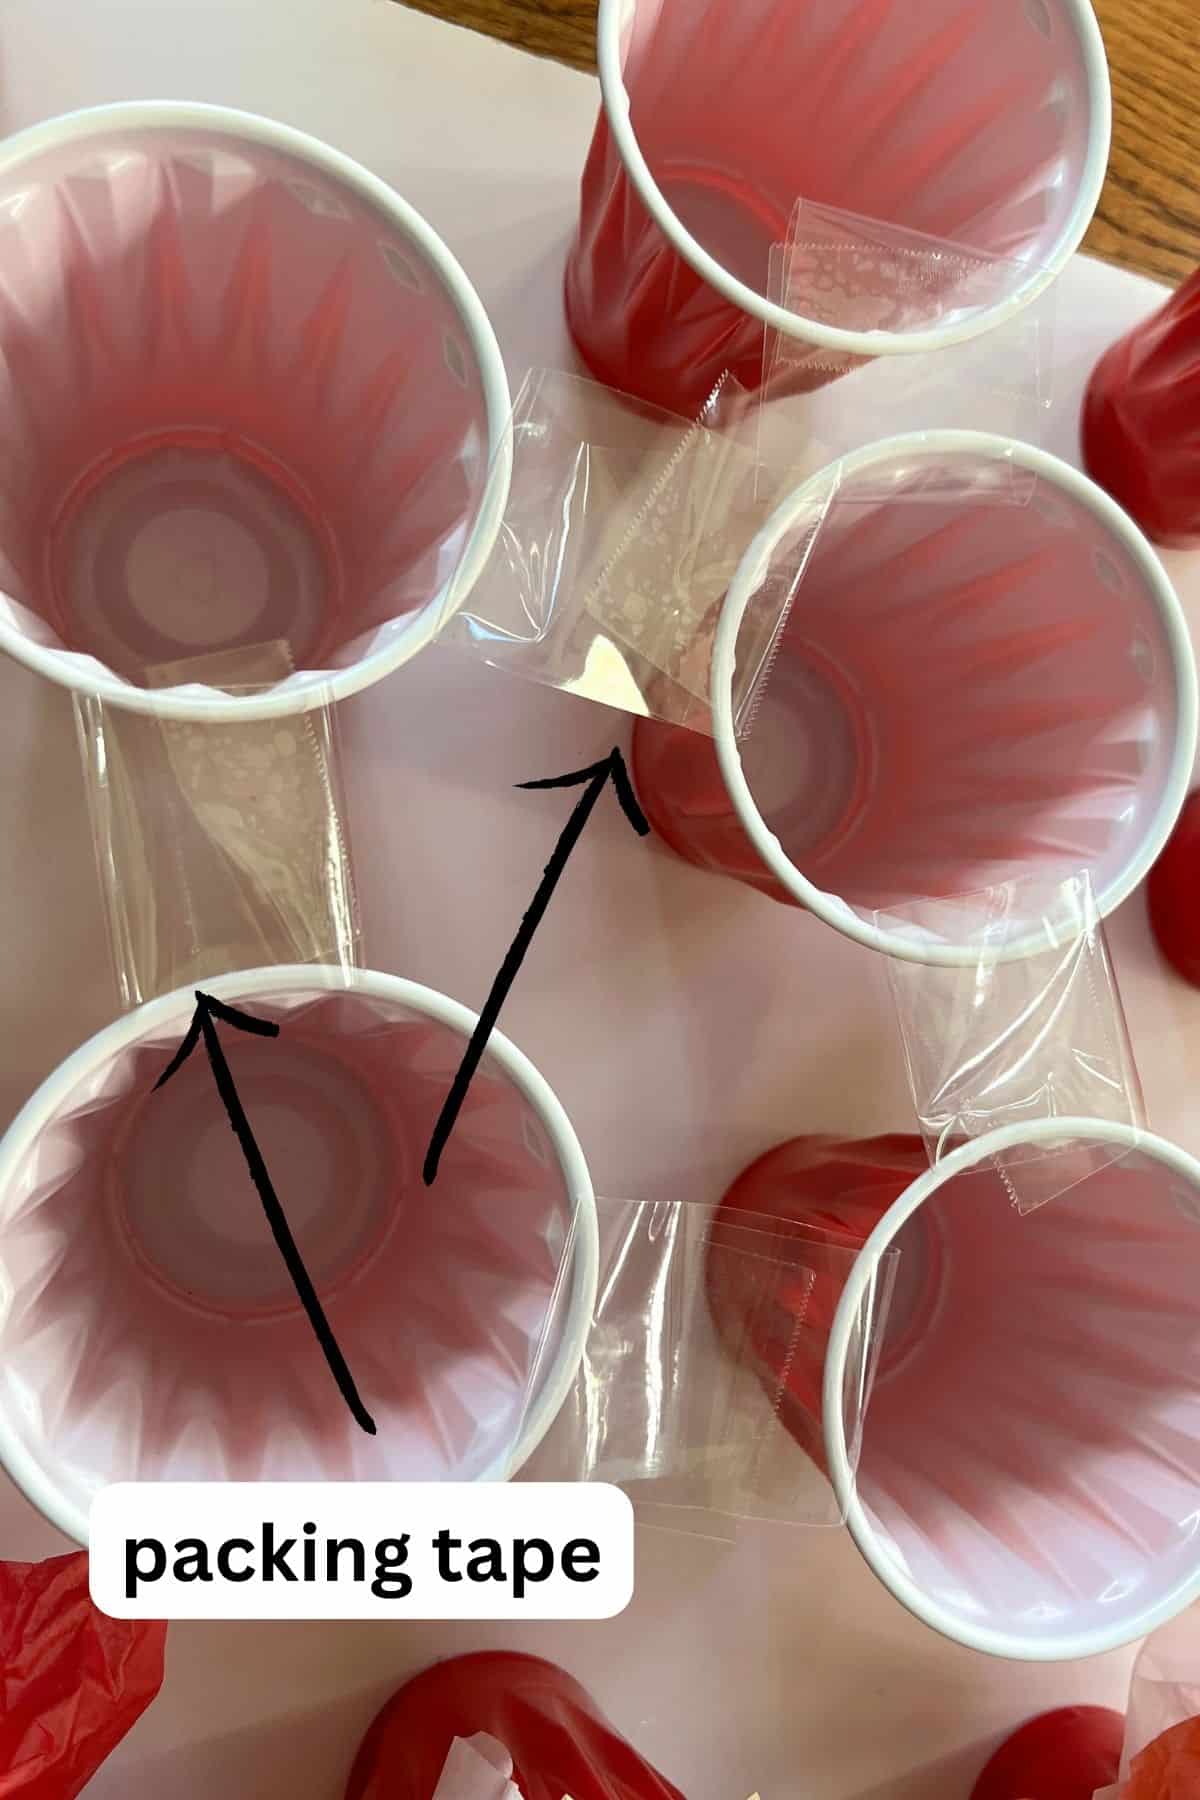 clear packing tape on the top of red plastic cups.